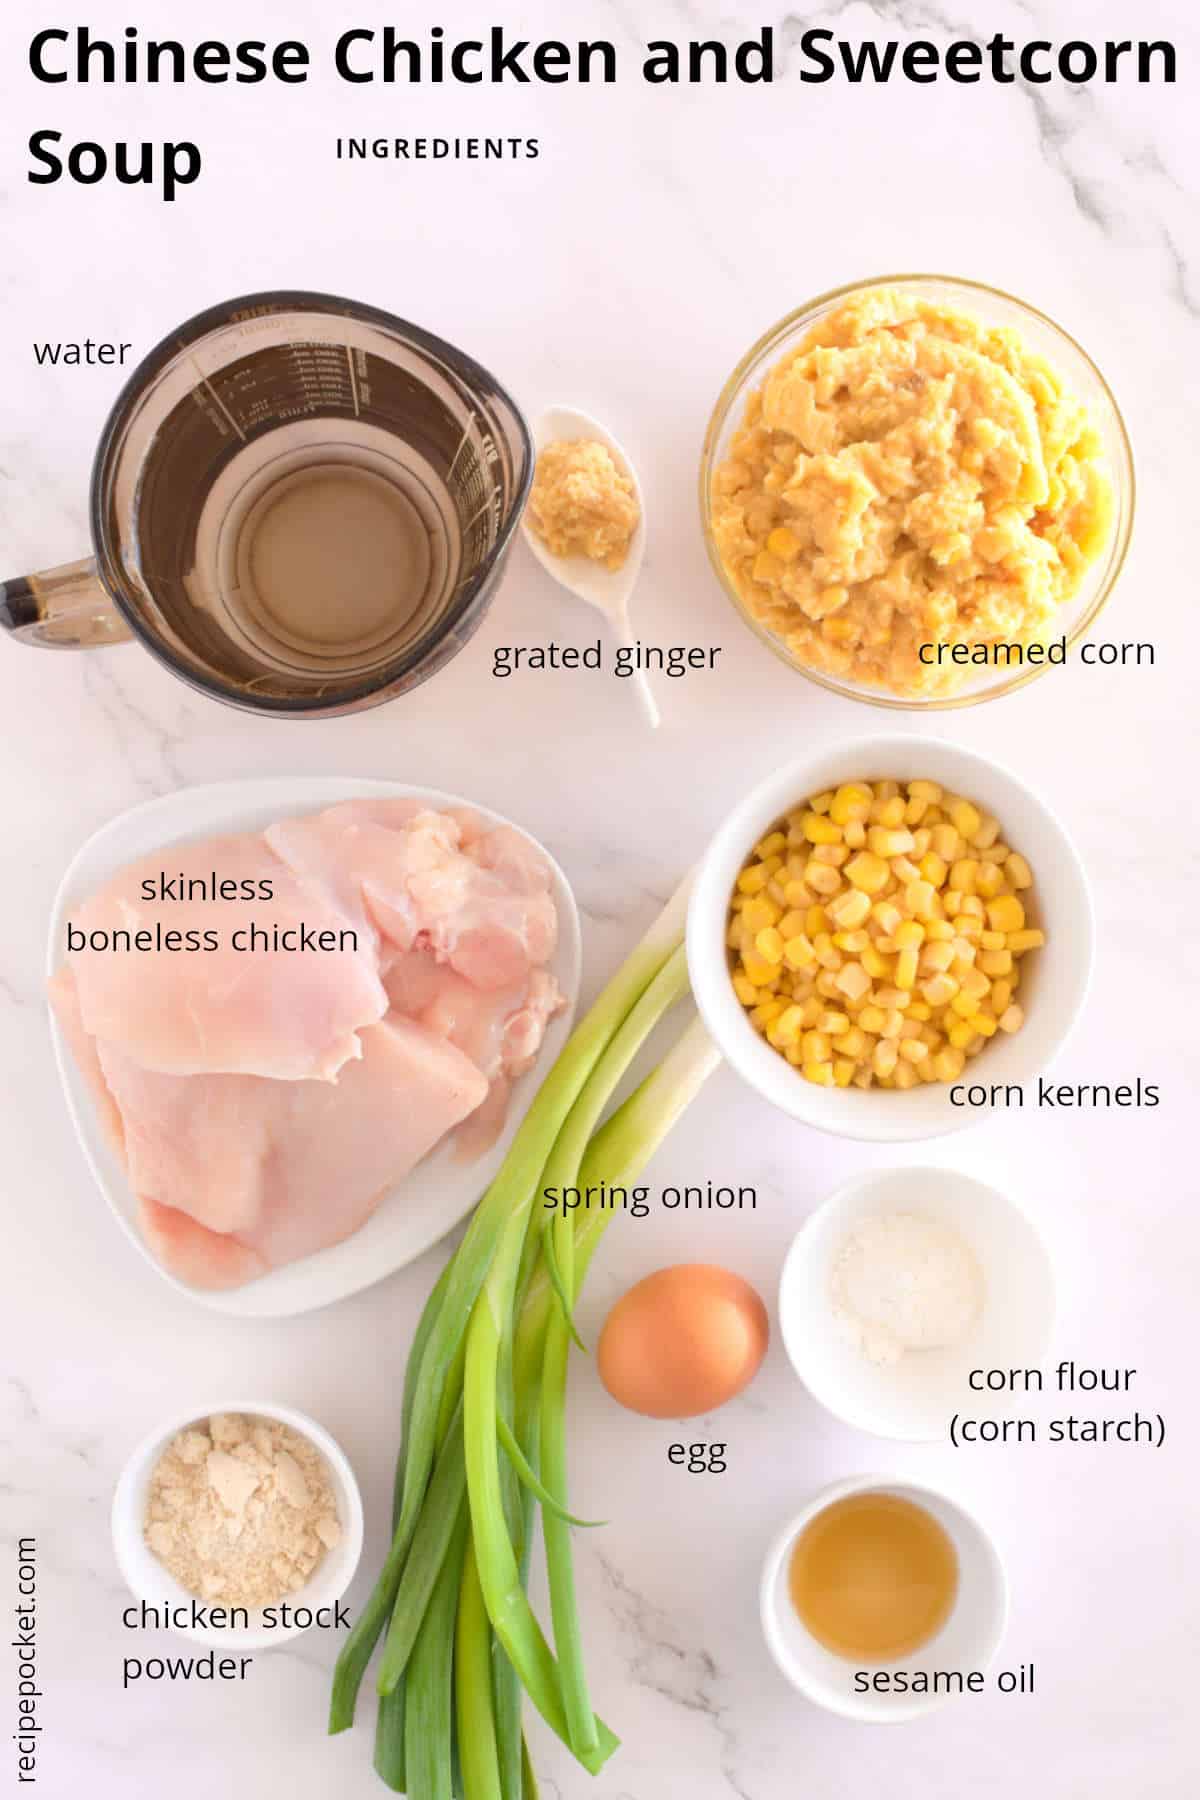 https://recipepocket.com/wp-content/uploads/2022/02/chinese-chicken-and-sweetcorn-soup-slow-cooker-ingredients-a.jpg